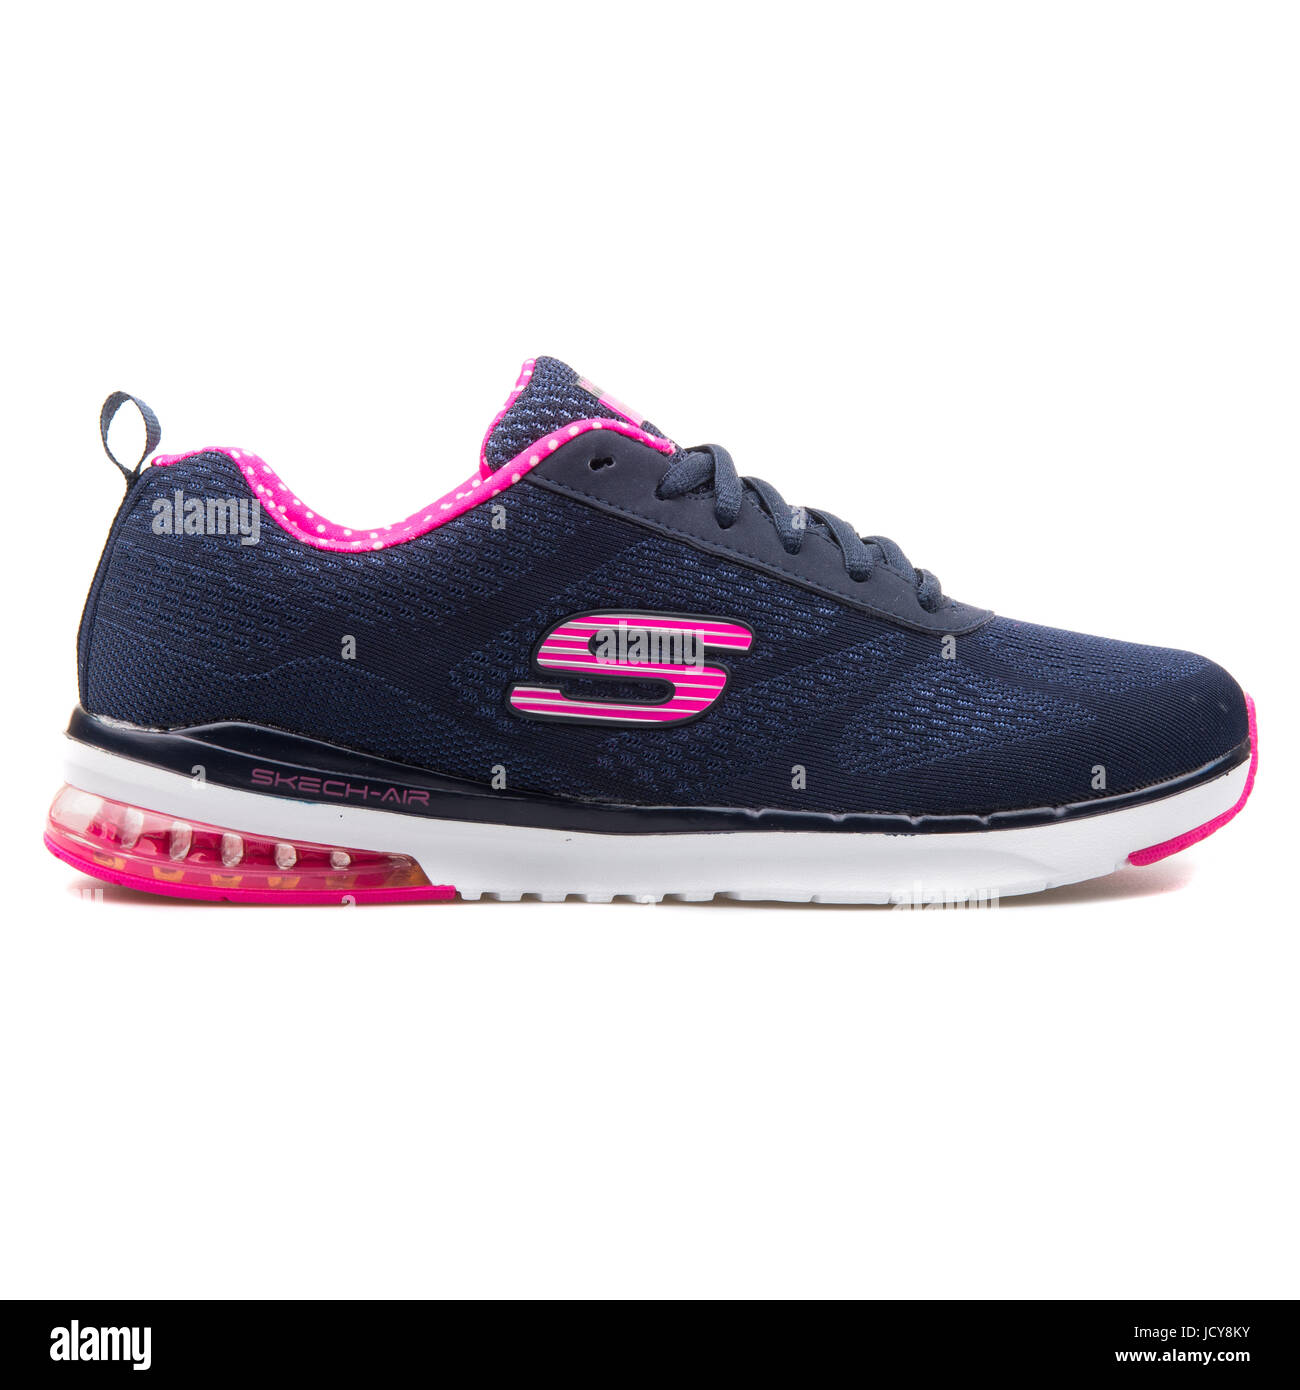 Skechers Skech-Air Infinity Navy Blue and Pink Women's Running Shoes -  12111-NVPK Stock Photo - Alamy